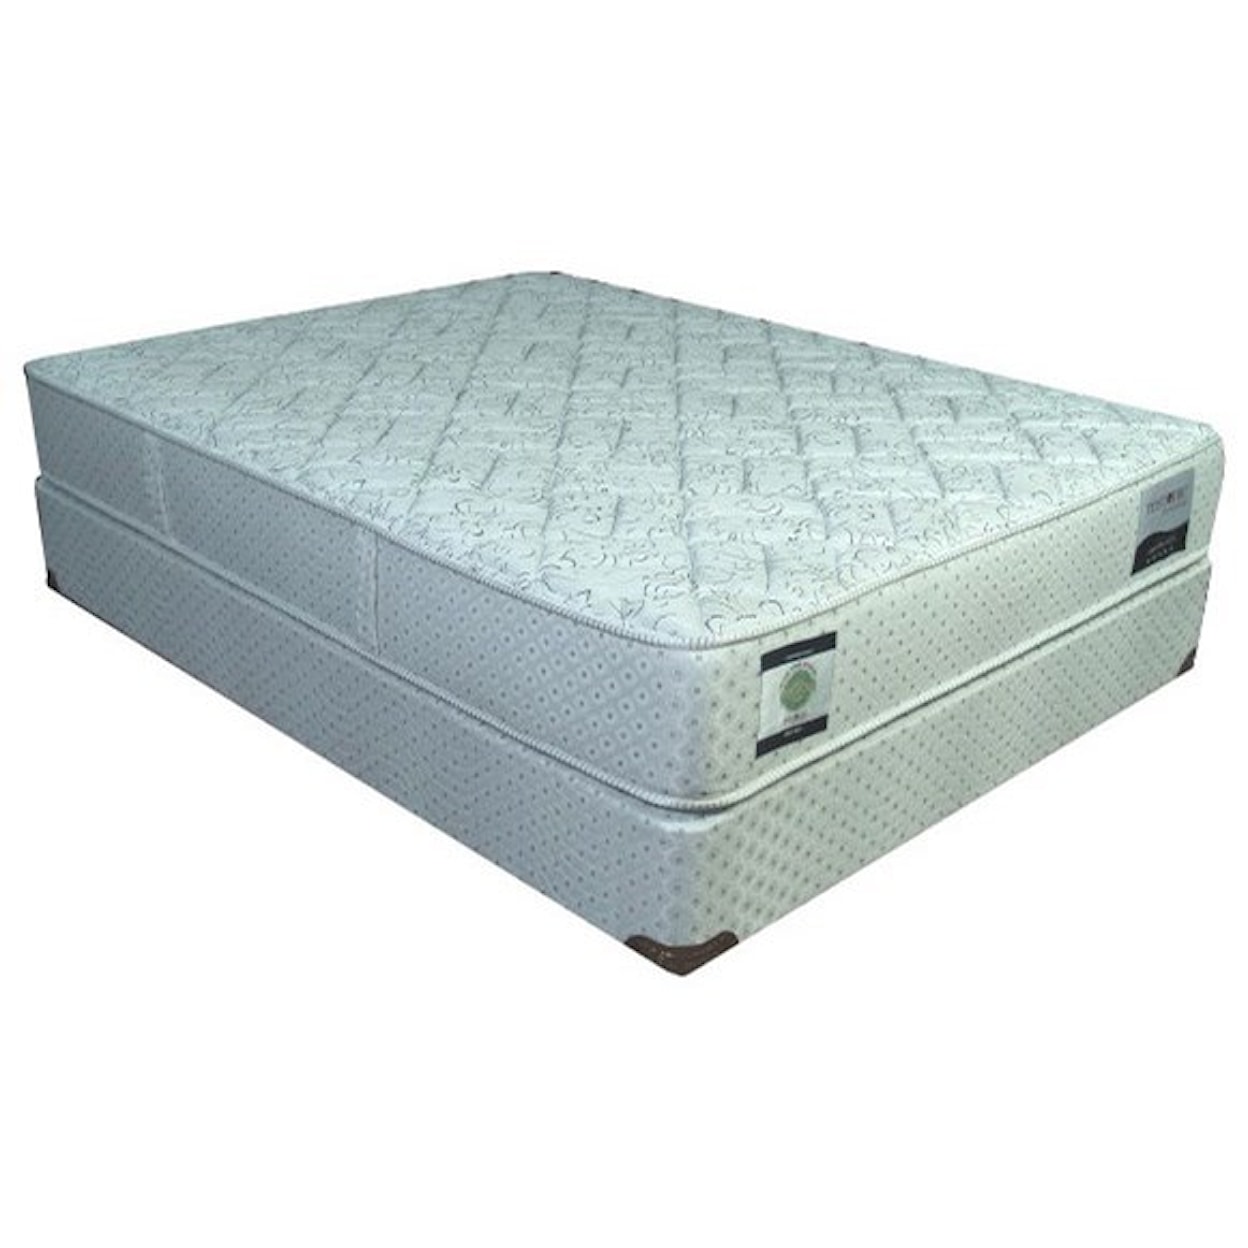 Restonic CC Linwood Firm King 12" Firm Two Sided Mattress Set